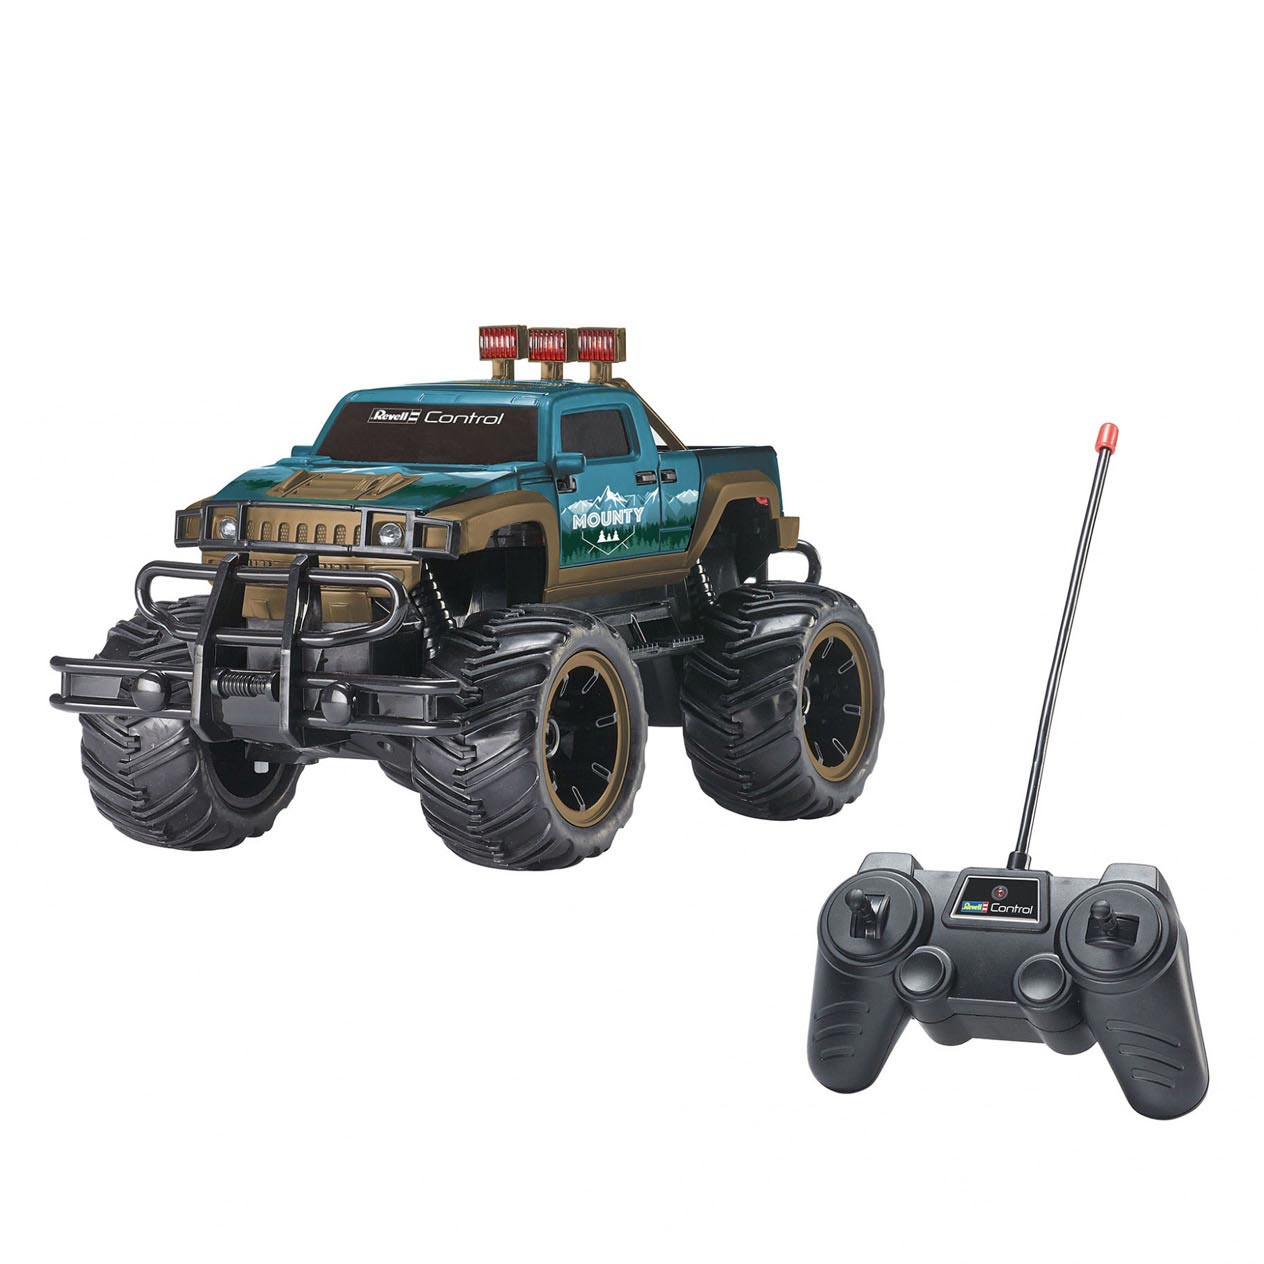 Revell Online-Shop // Model Construction // Remote Control Cars